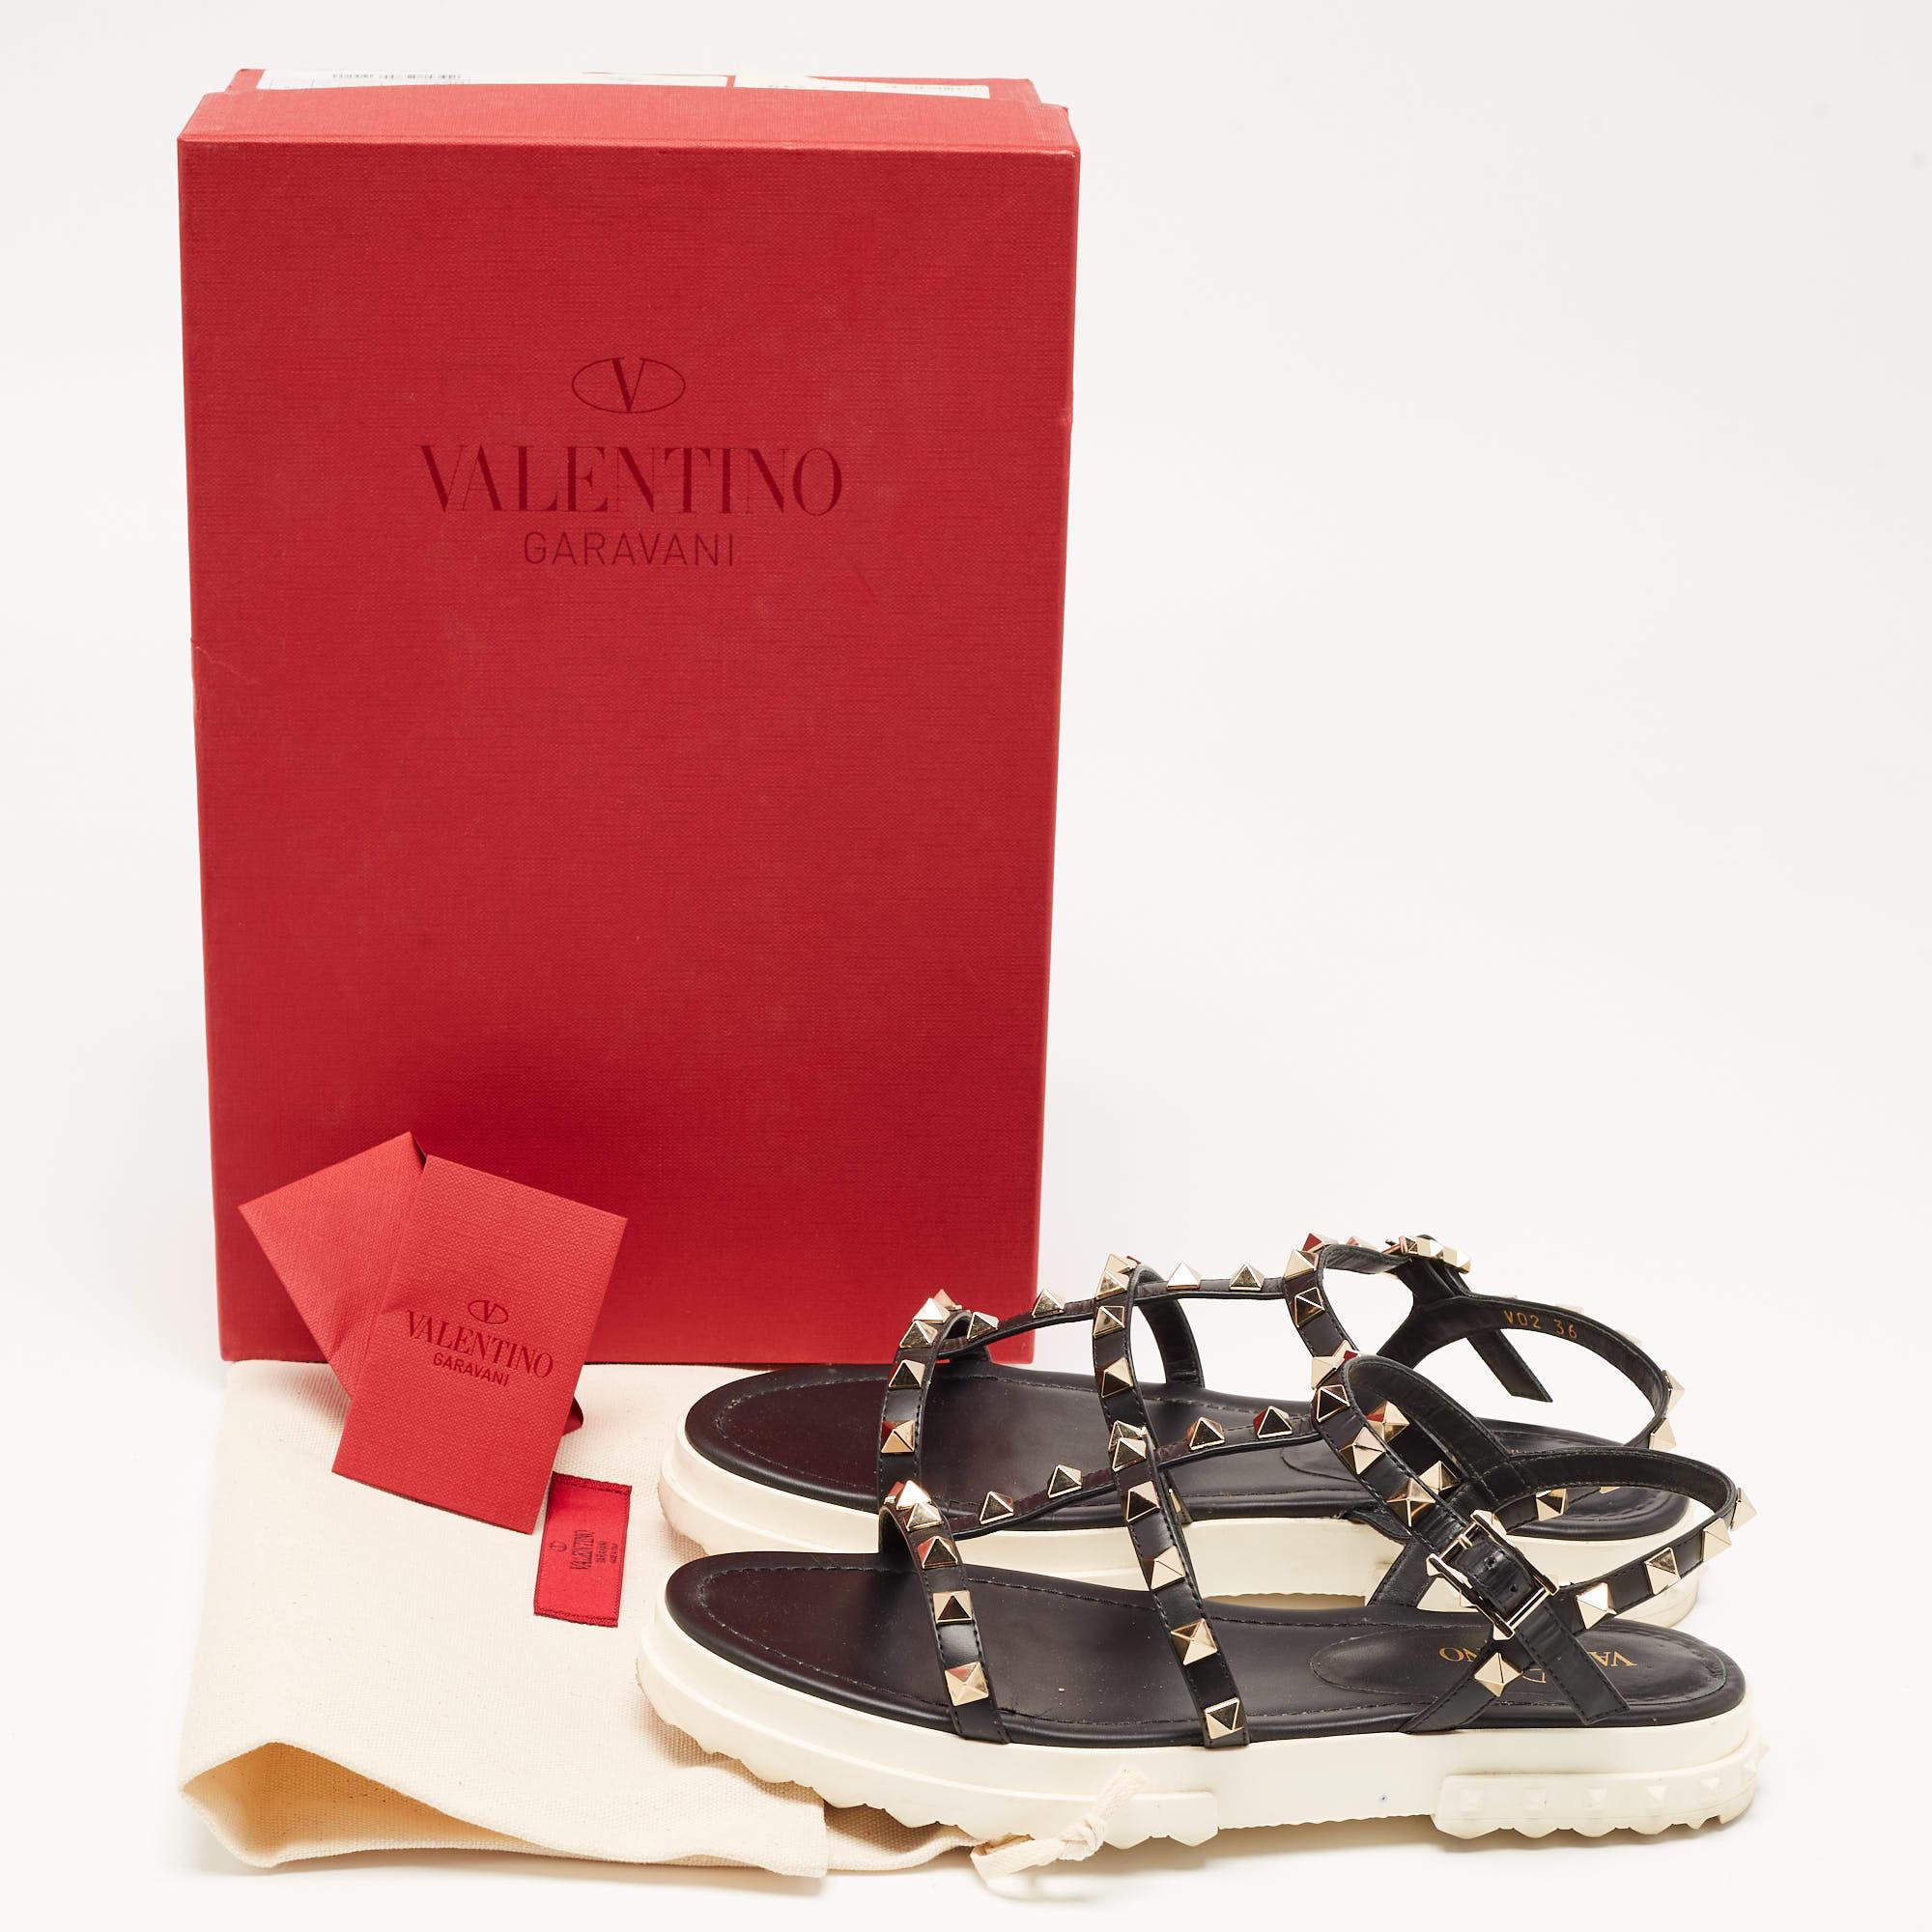 Valentino Black Leather Studded Accents Gladiator Sandals Size 36 5